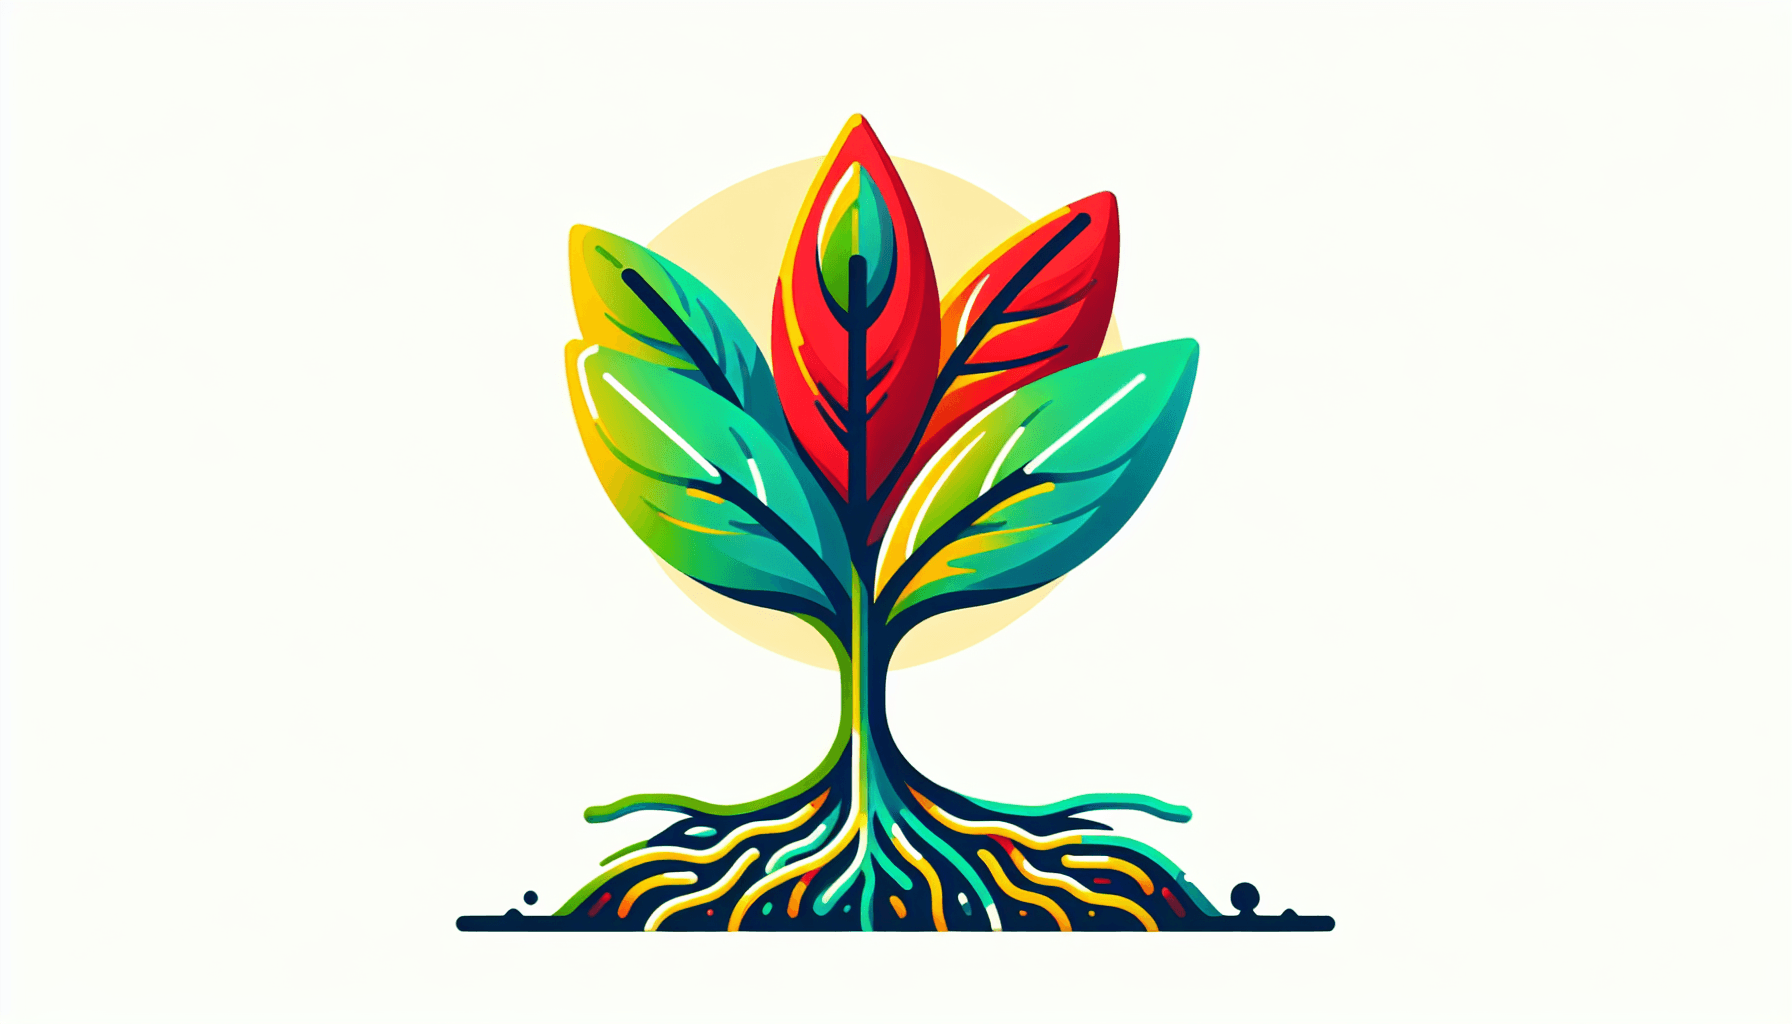 Sprout in flat illustration style and white background, red #f47574, green #88c7a8, yellow #fcc44b, and blue #645bc8 colors.